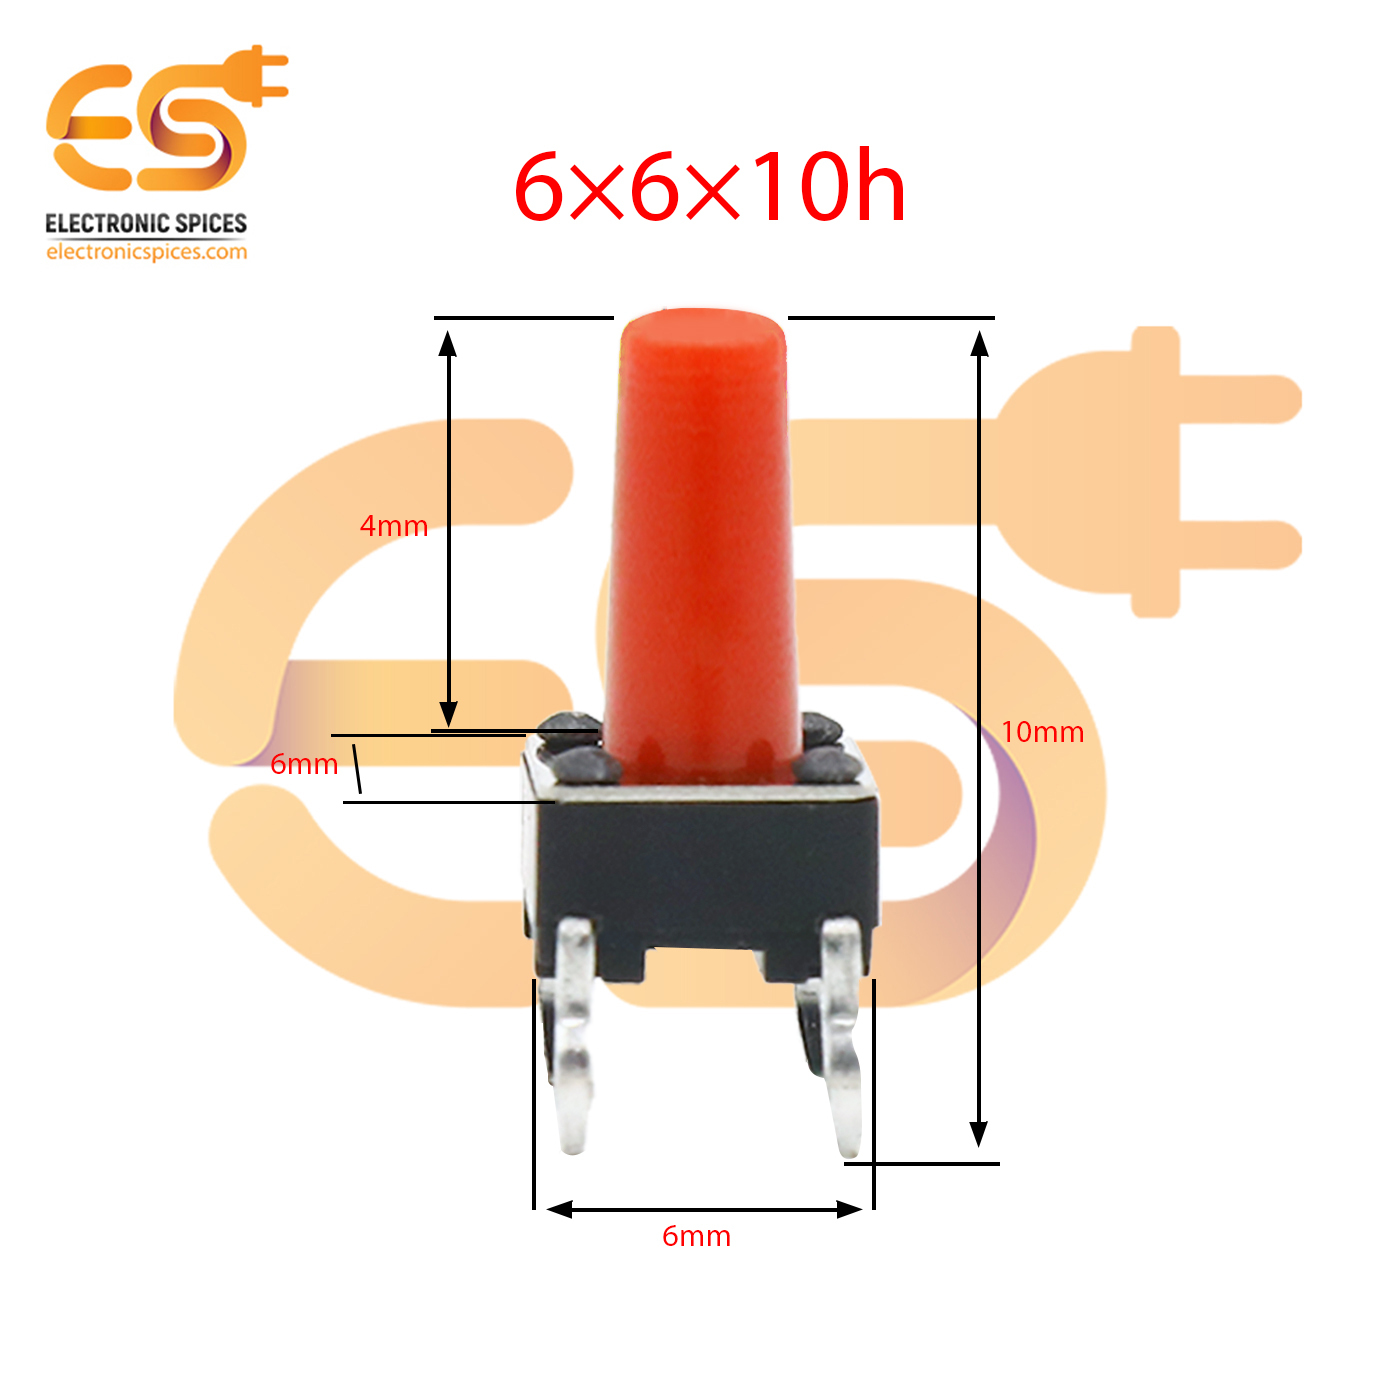 6 x 6 x 10mm Red color tactile momentary push button switches